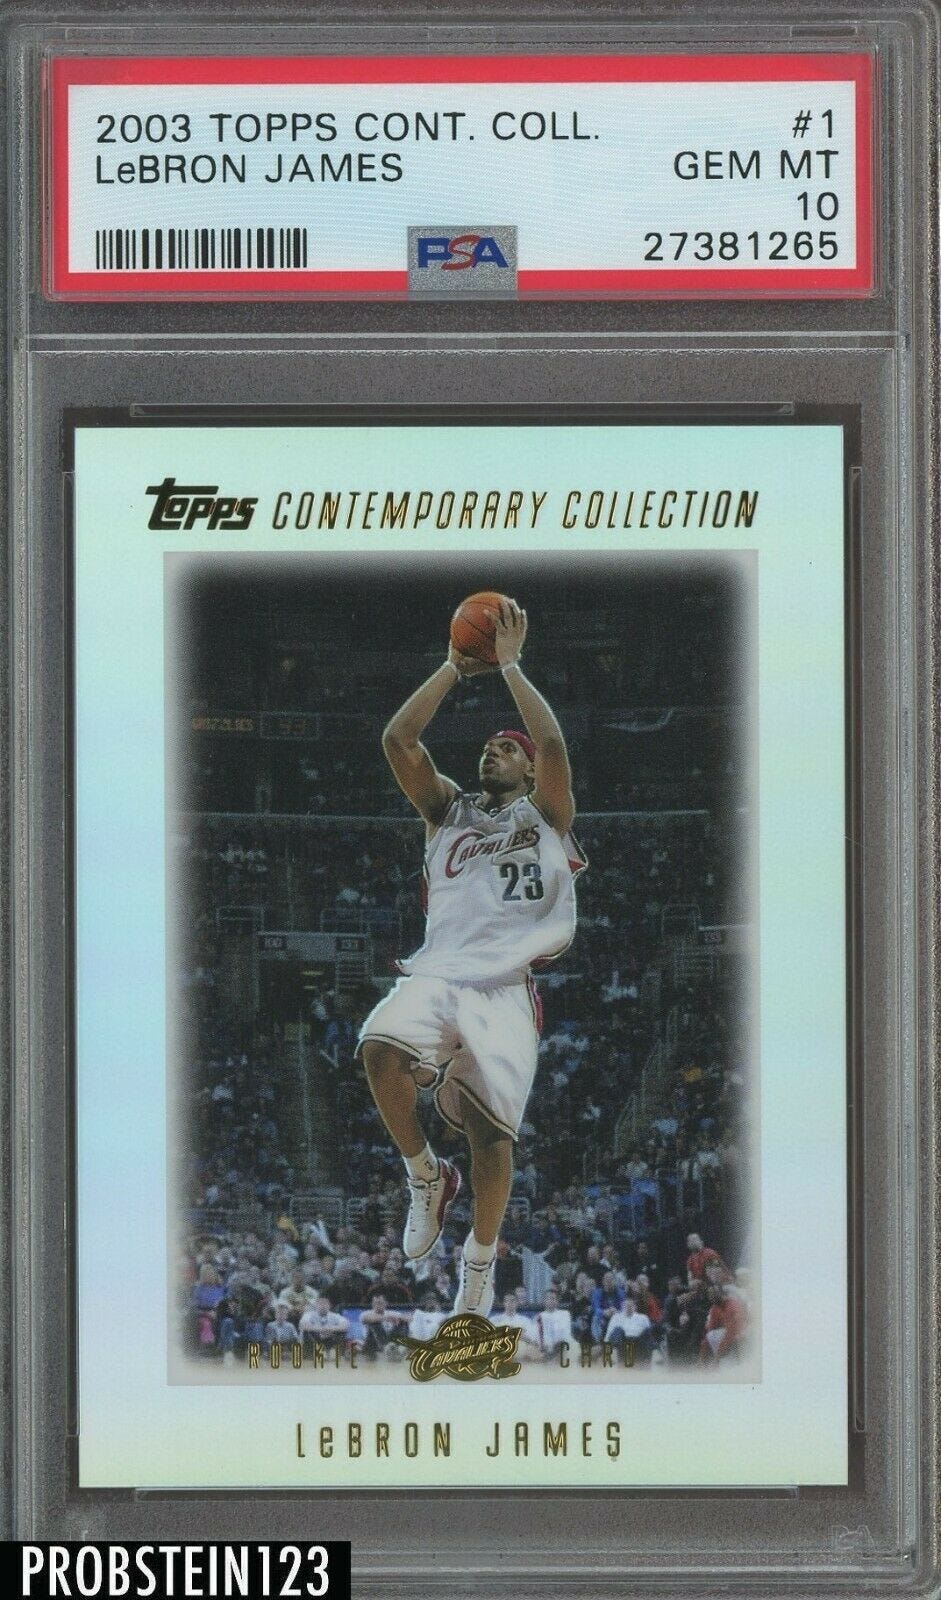 Image 1 - 2003-04 Topps Contemporary Collection #1 LeBron James RC Rookie PSA 10 GEM MINT